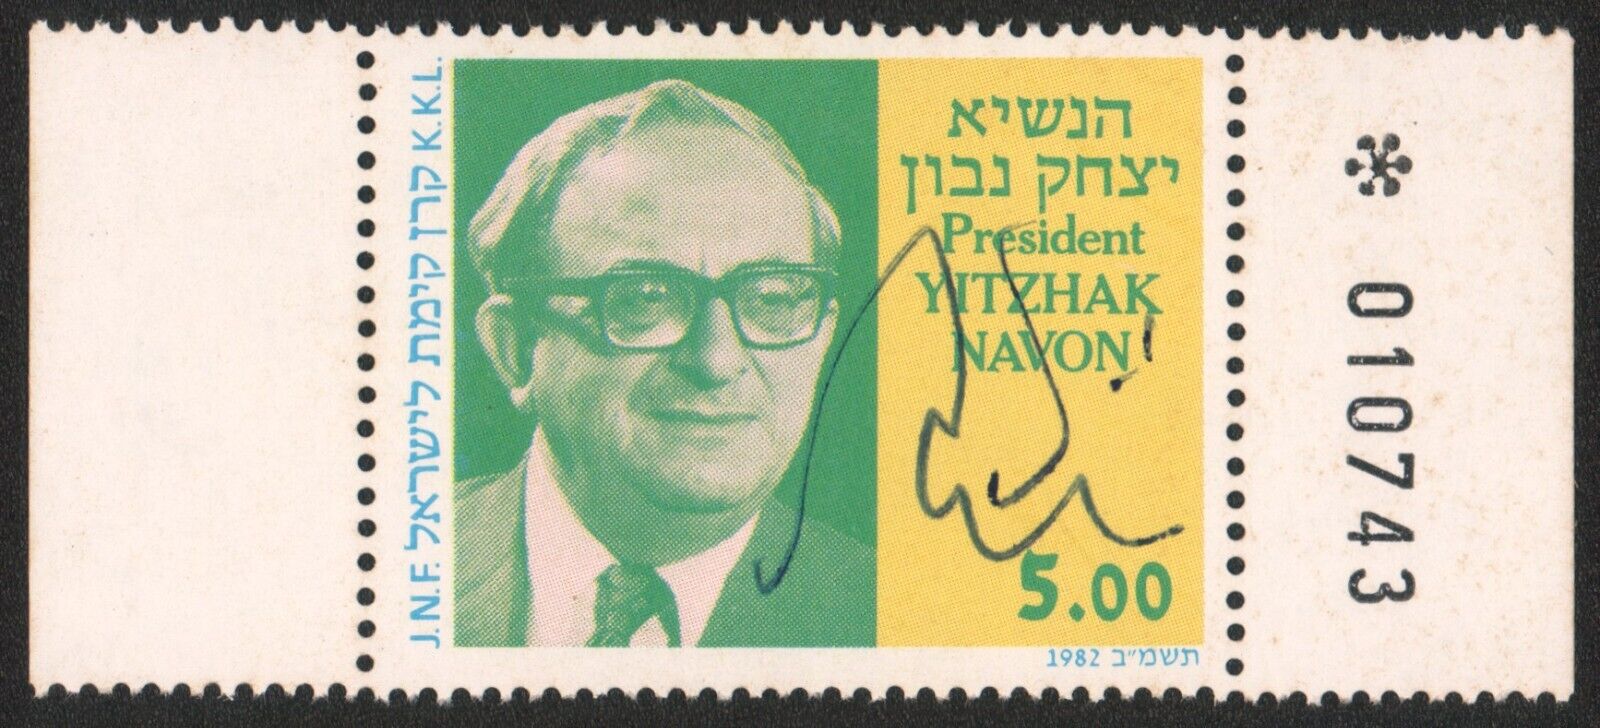 Yitzhak Navon Signed Stamp, the fifth President of Israel